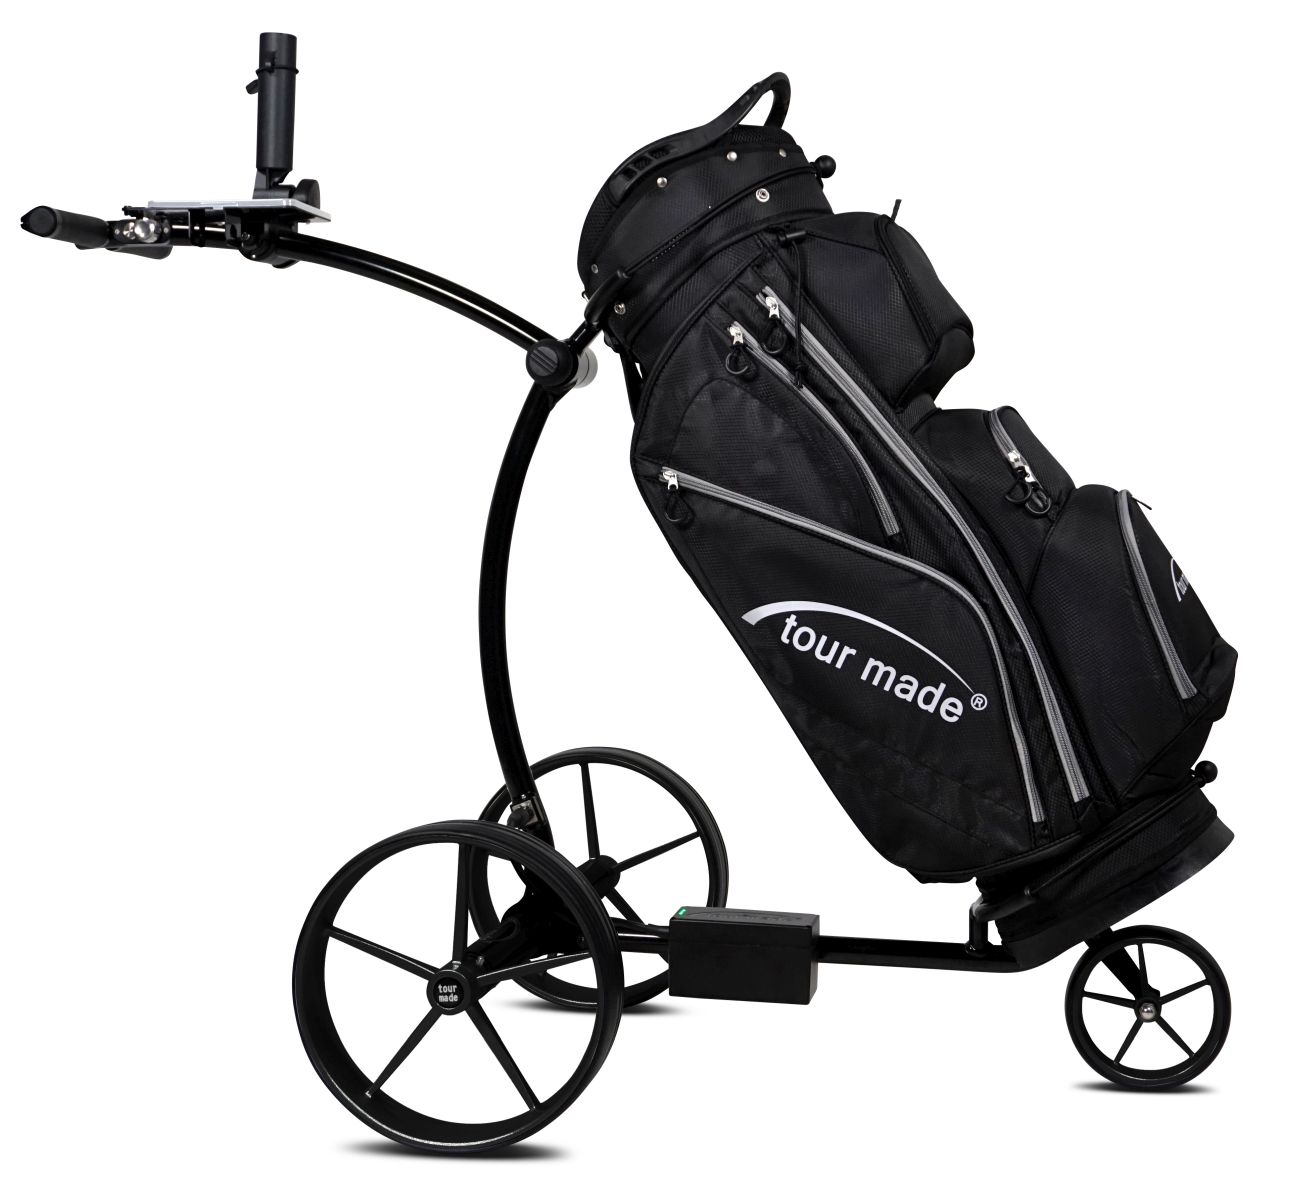 Tour Made RT-650S Electric Golf Trolley Frame Black